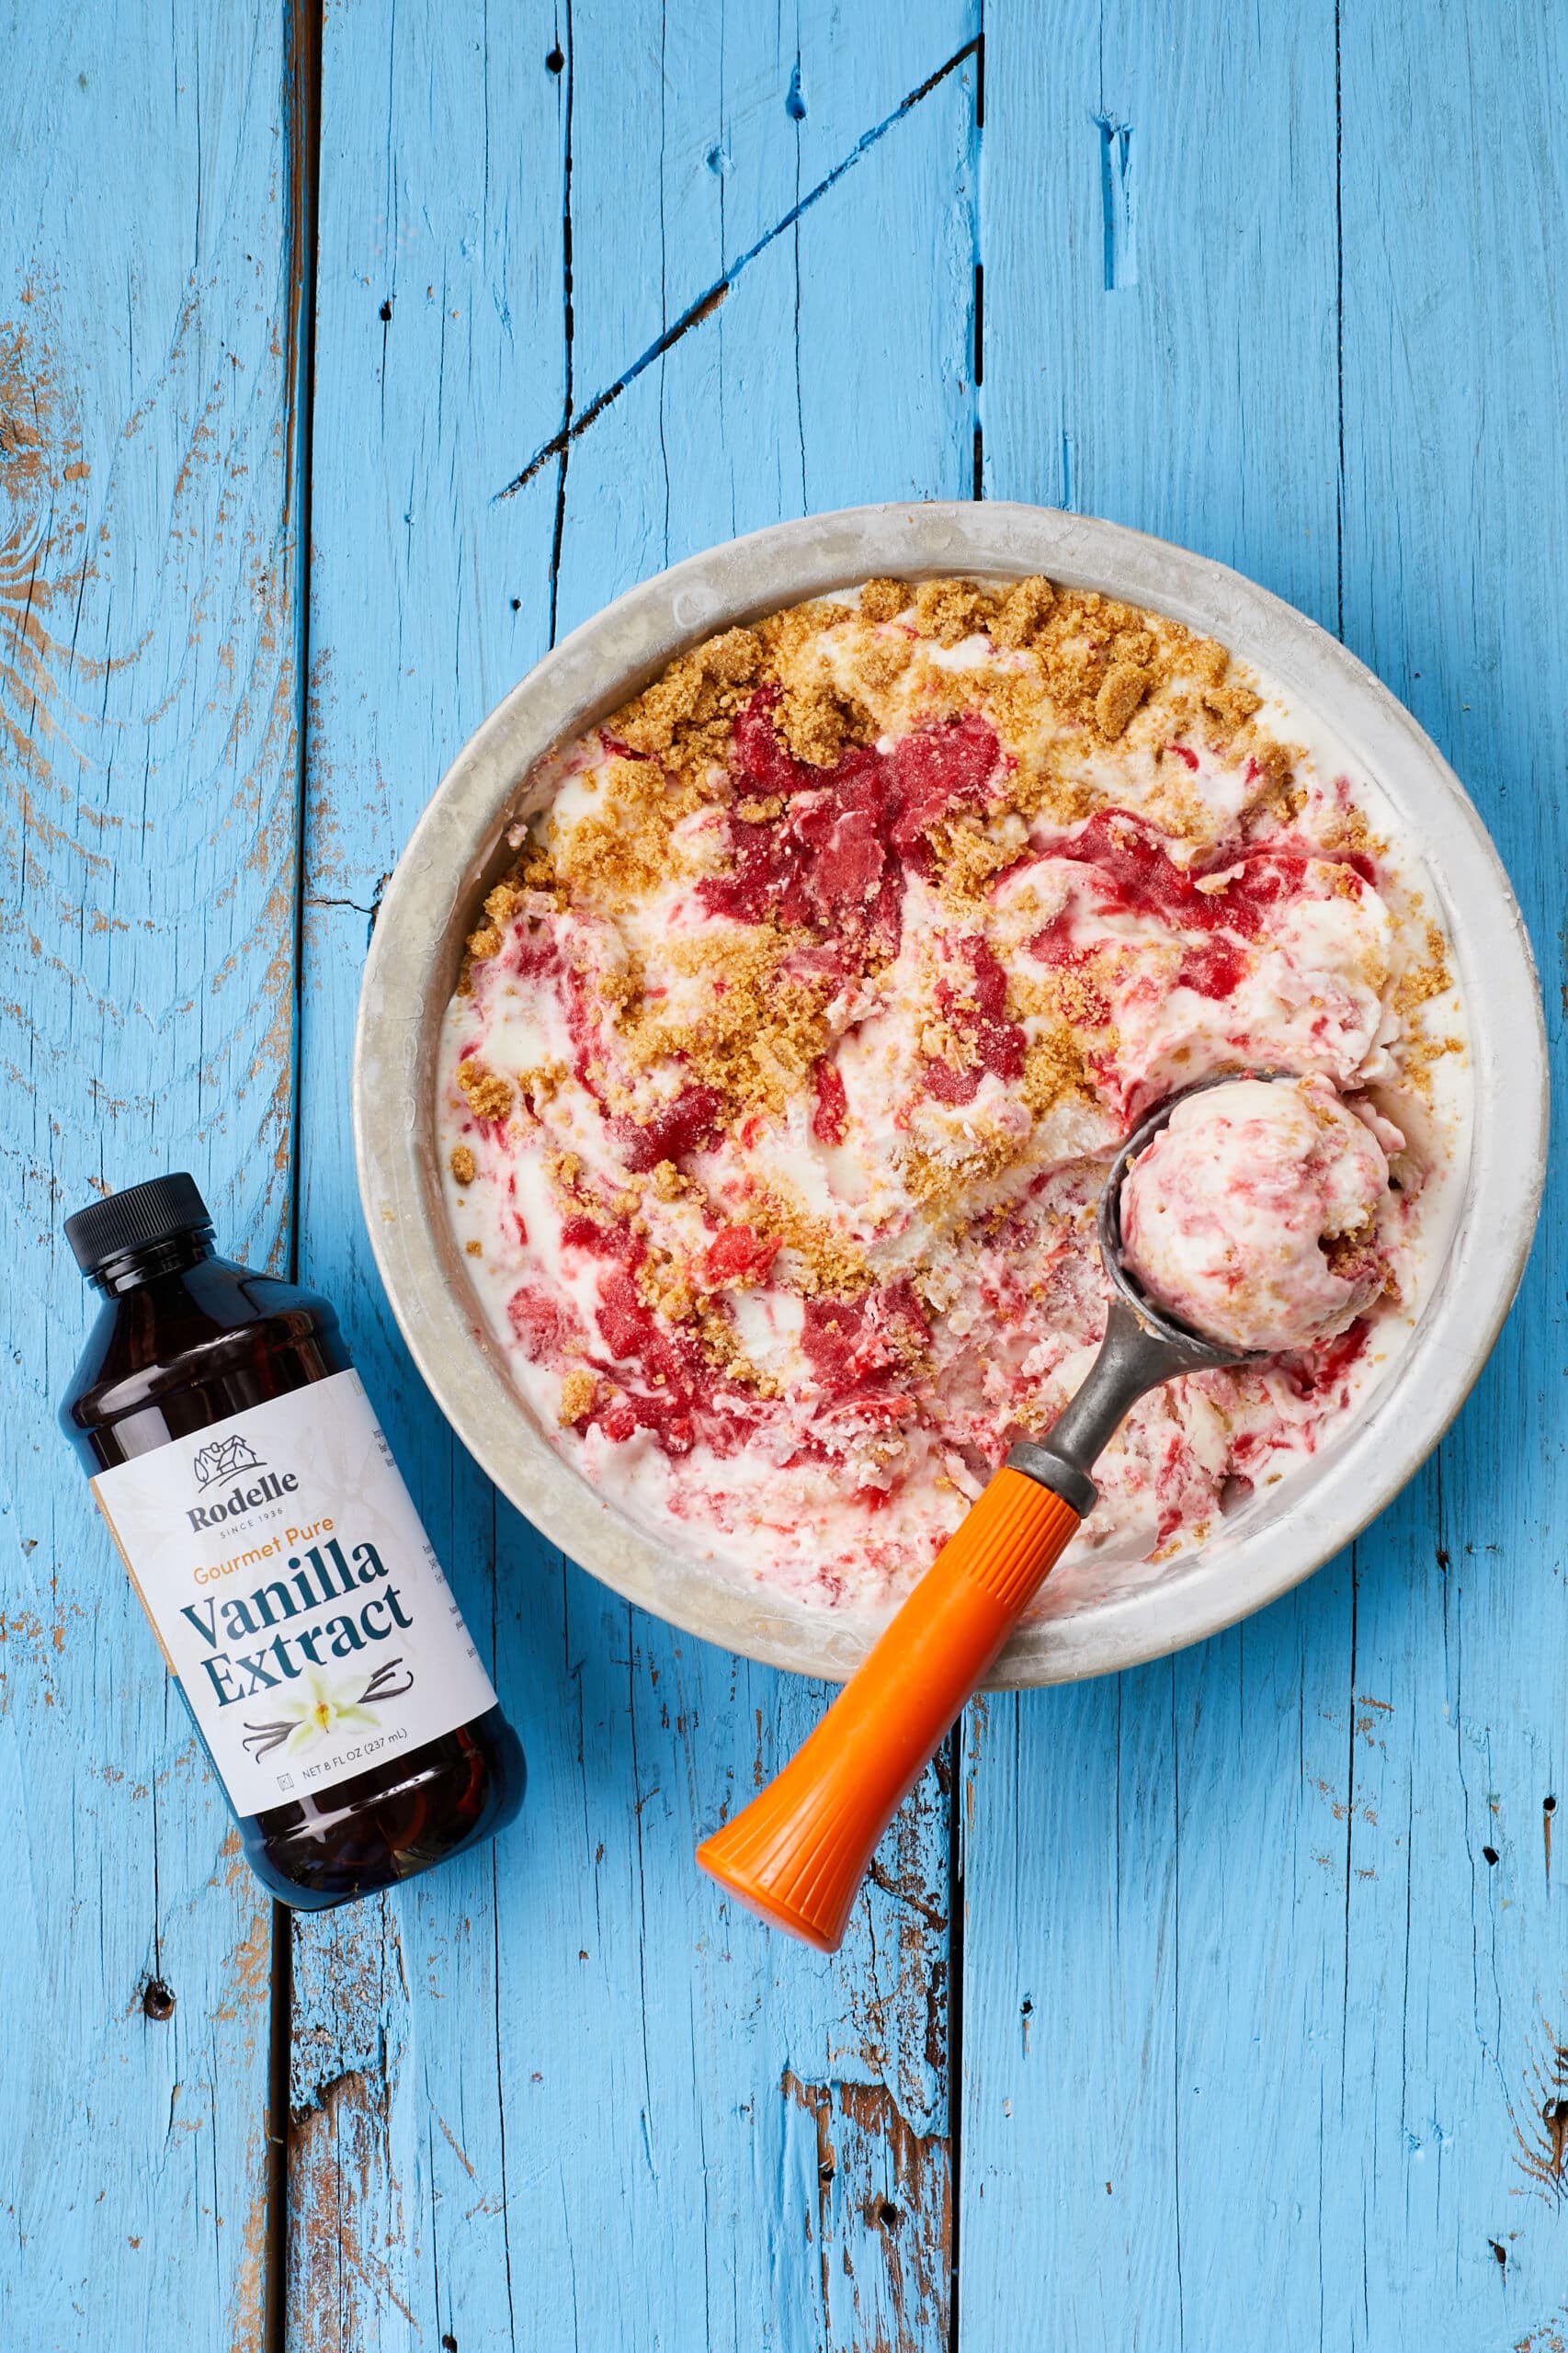 An over-head shot of a bowl of Strawberry Cheesecake Ice Cream shows the creamy, thick ice cream with swirls of jammy strawberries and chunks of buttery Graham cracker crust. A bottle of vanilla extract is on the side.